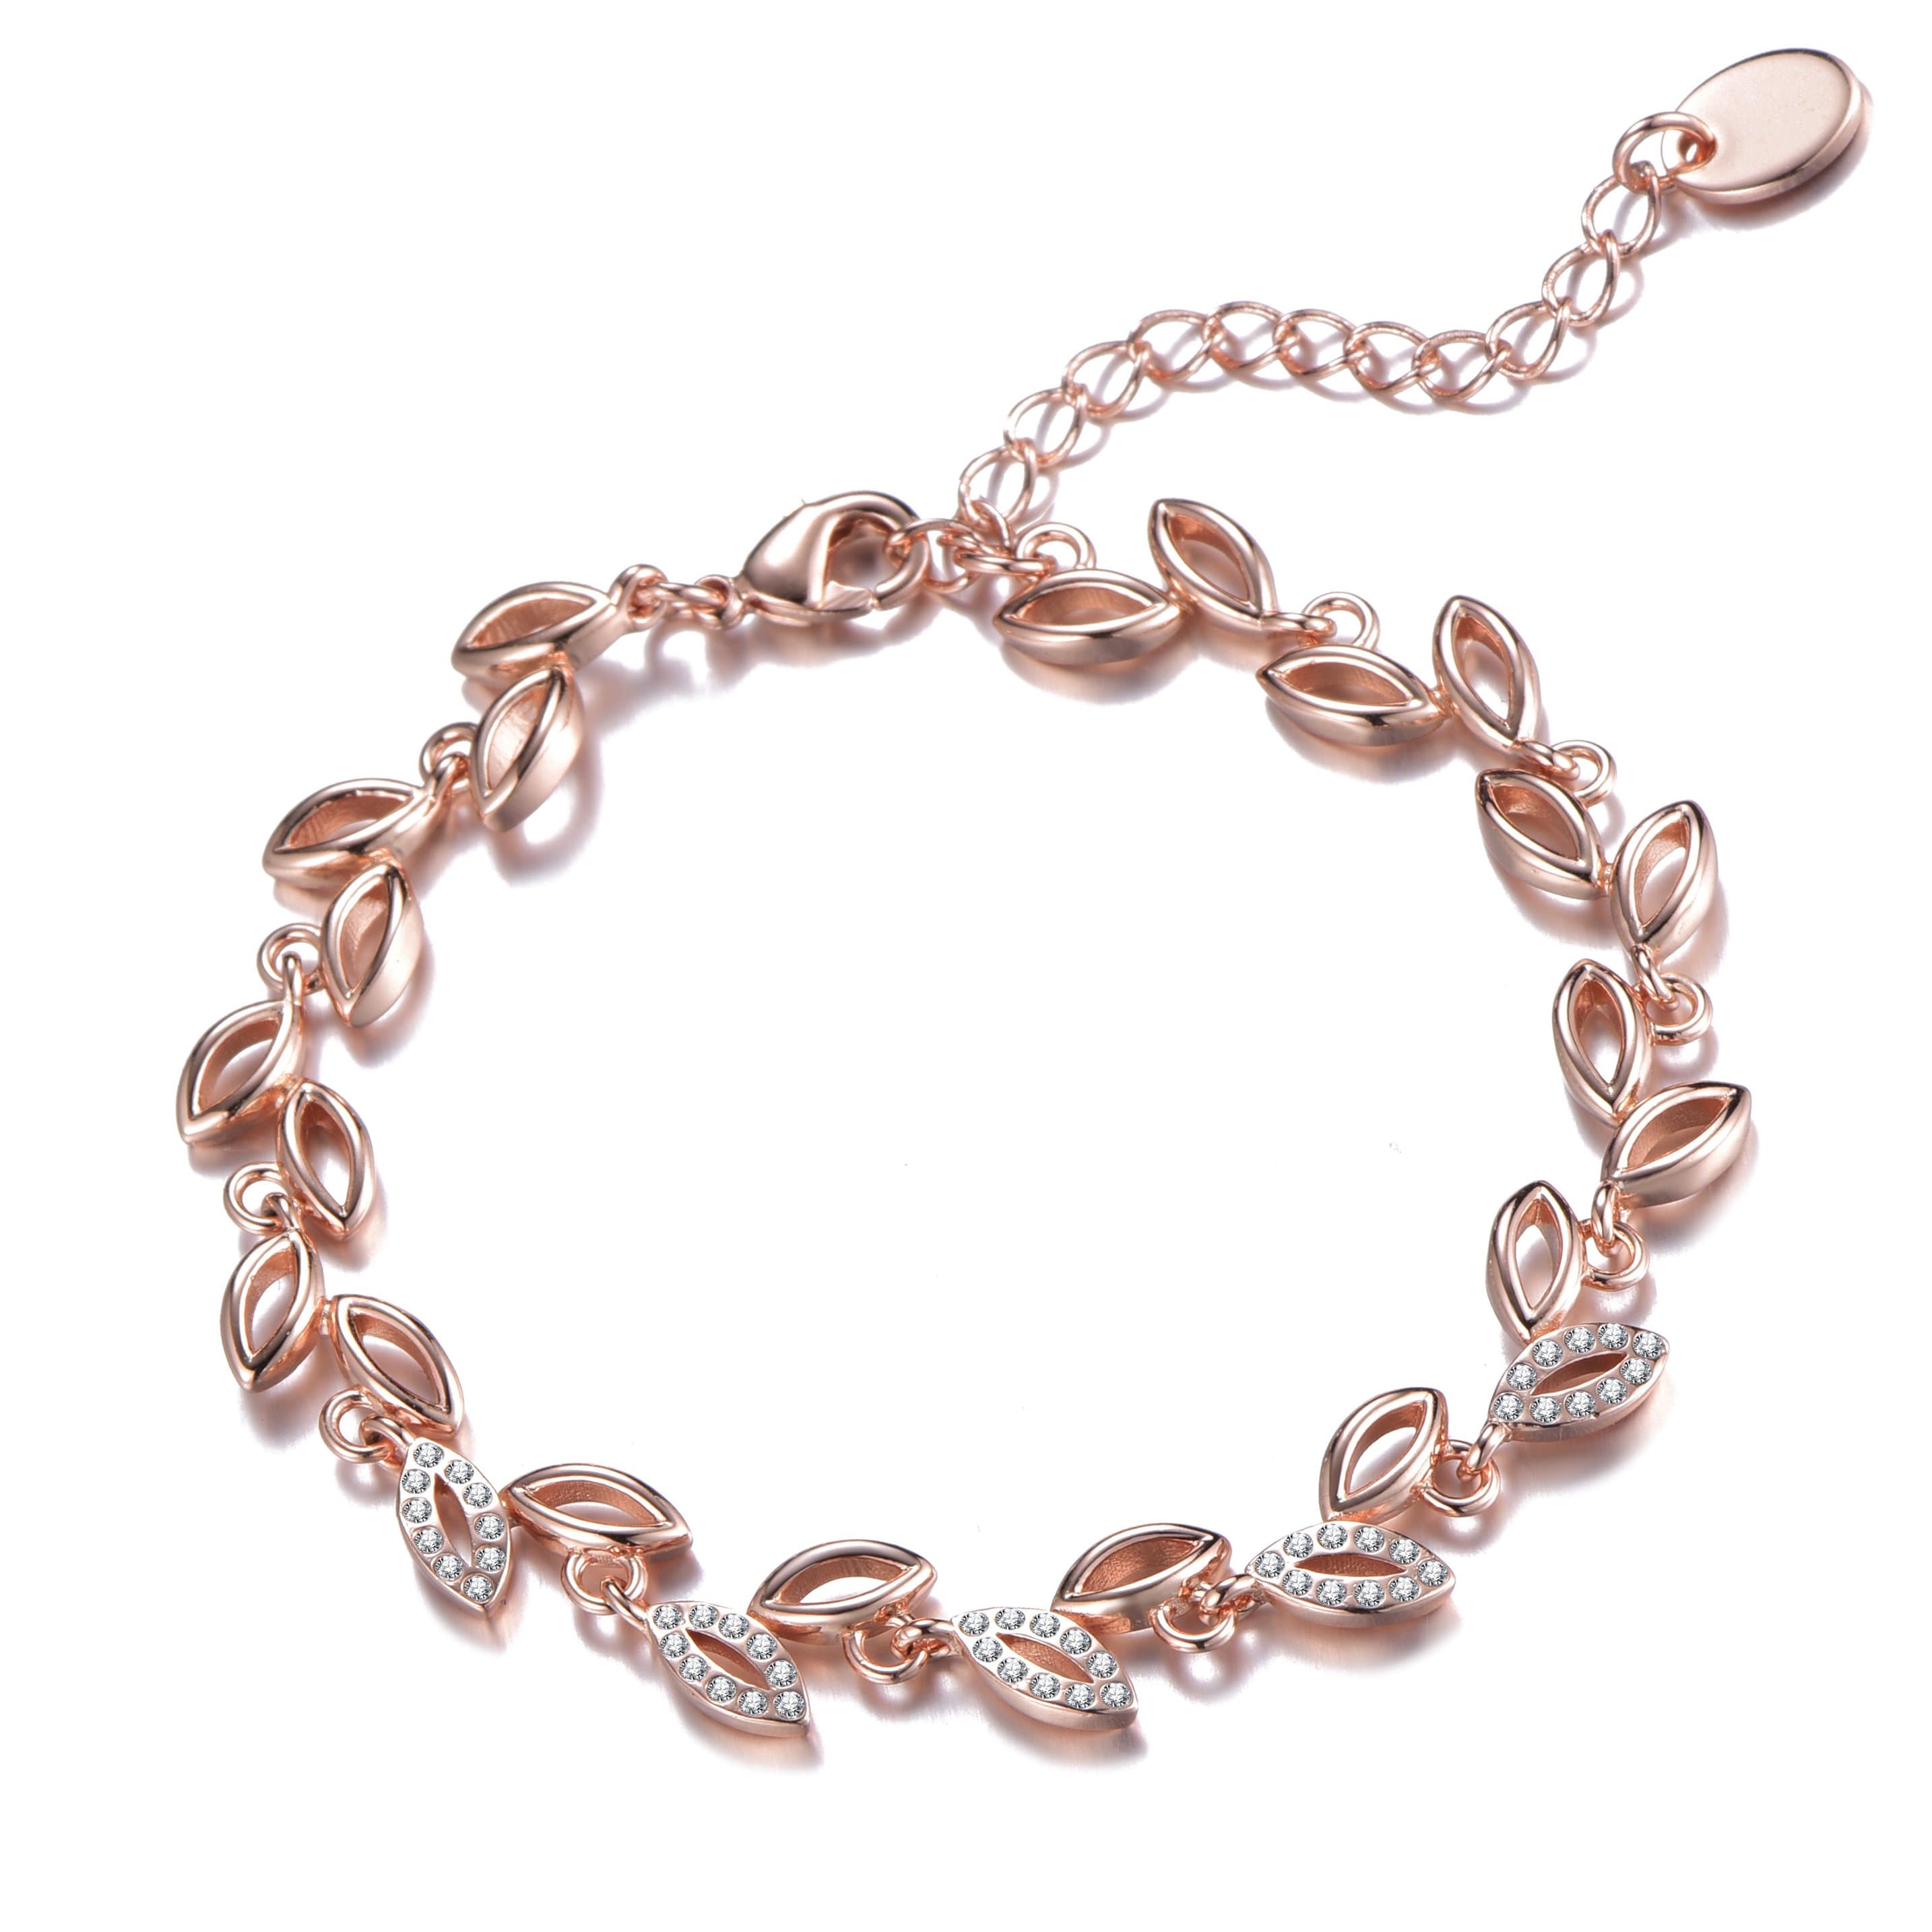 Rose Gold Plated Leaf Bracelet Created With Crystals From Zircondia® by Philip Jones Jewellery